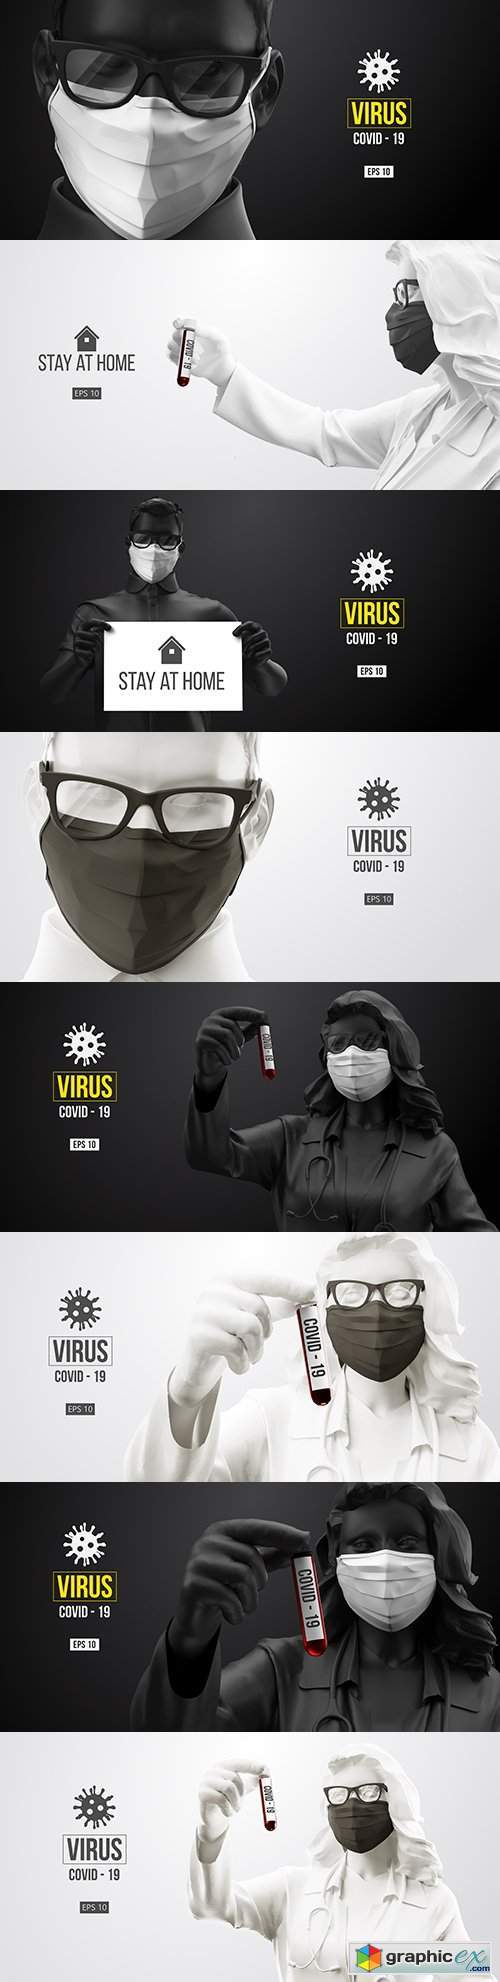 Coronavirus people in medical mask and virus protection